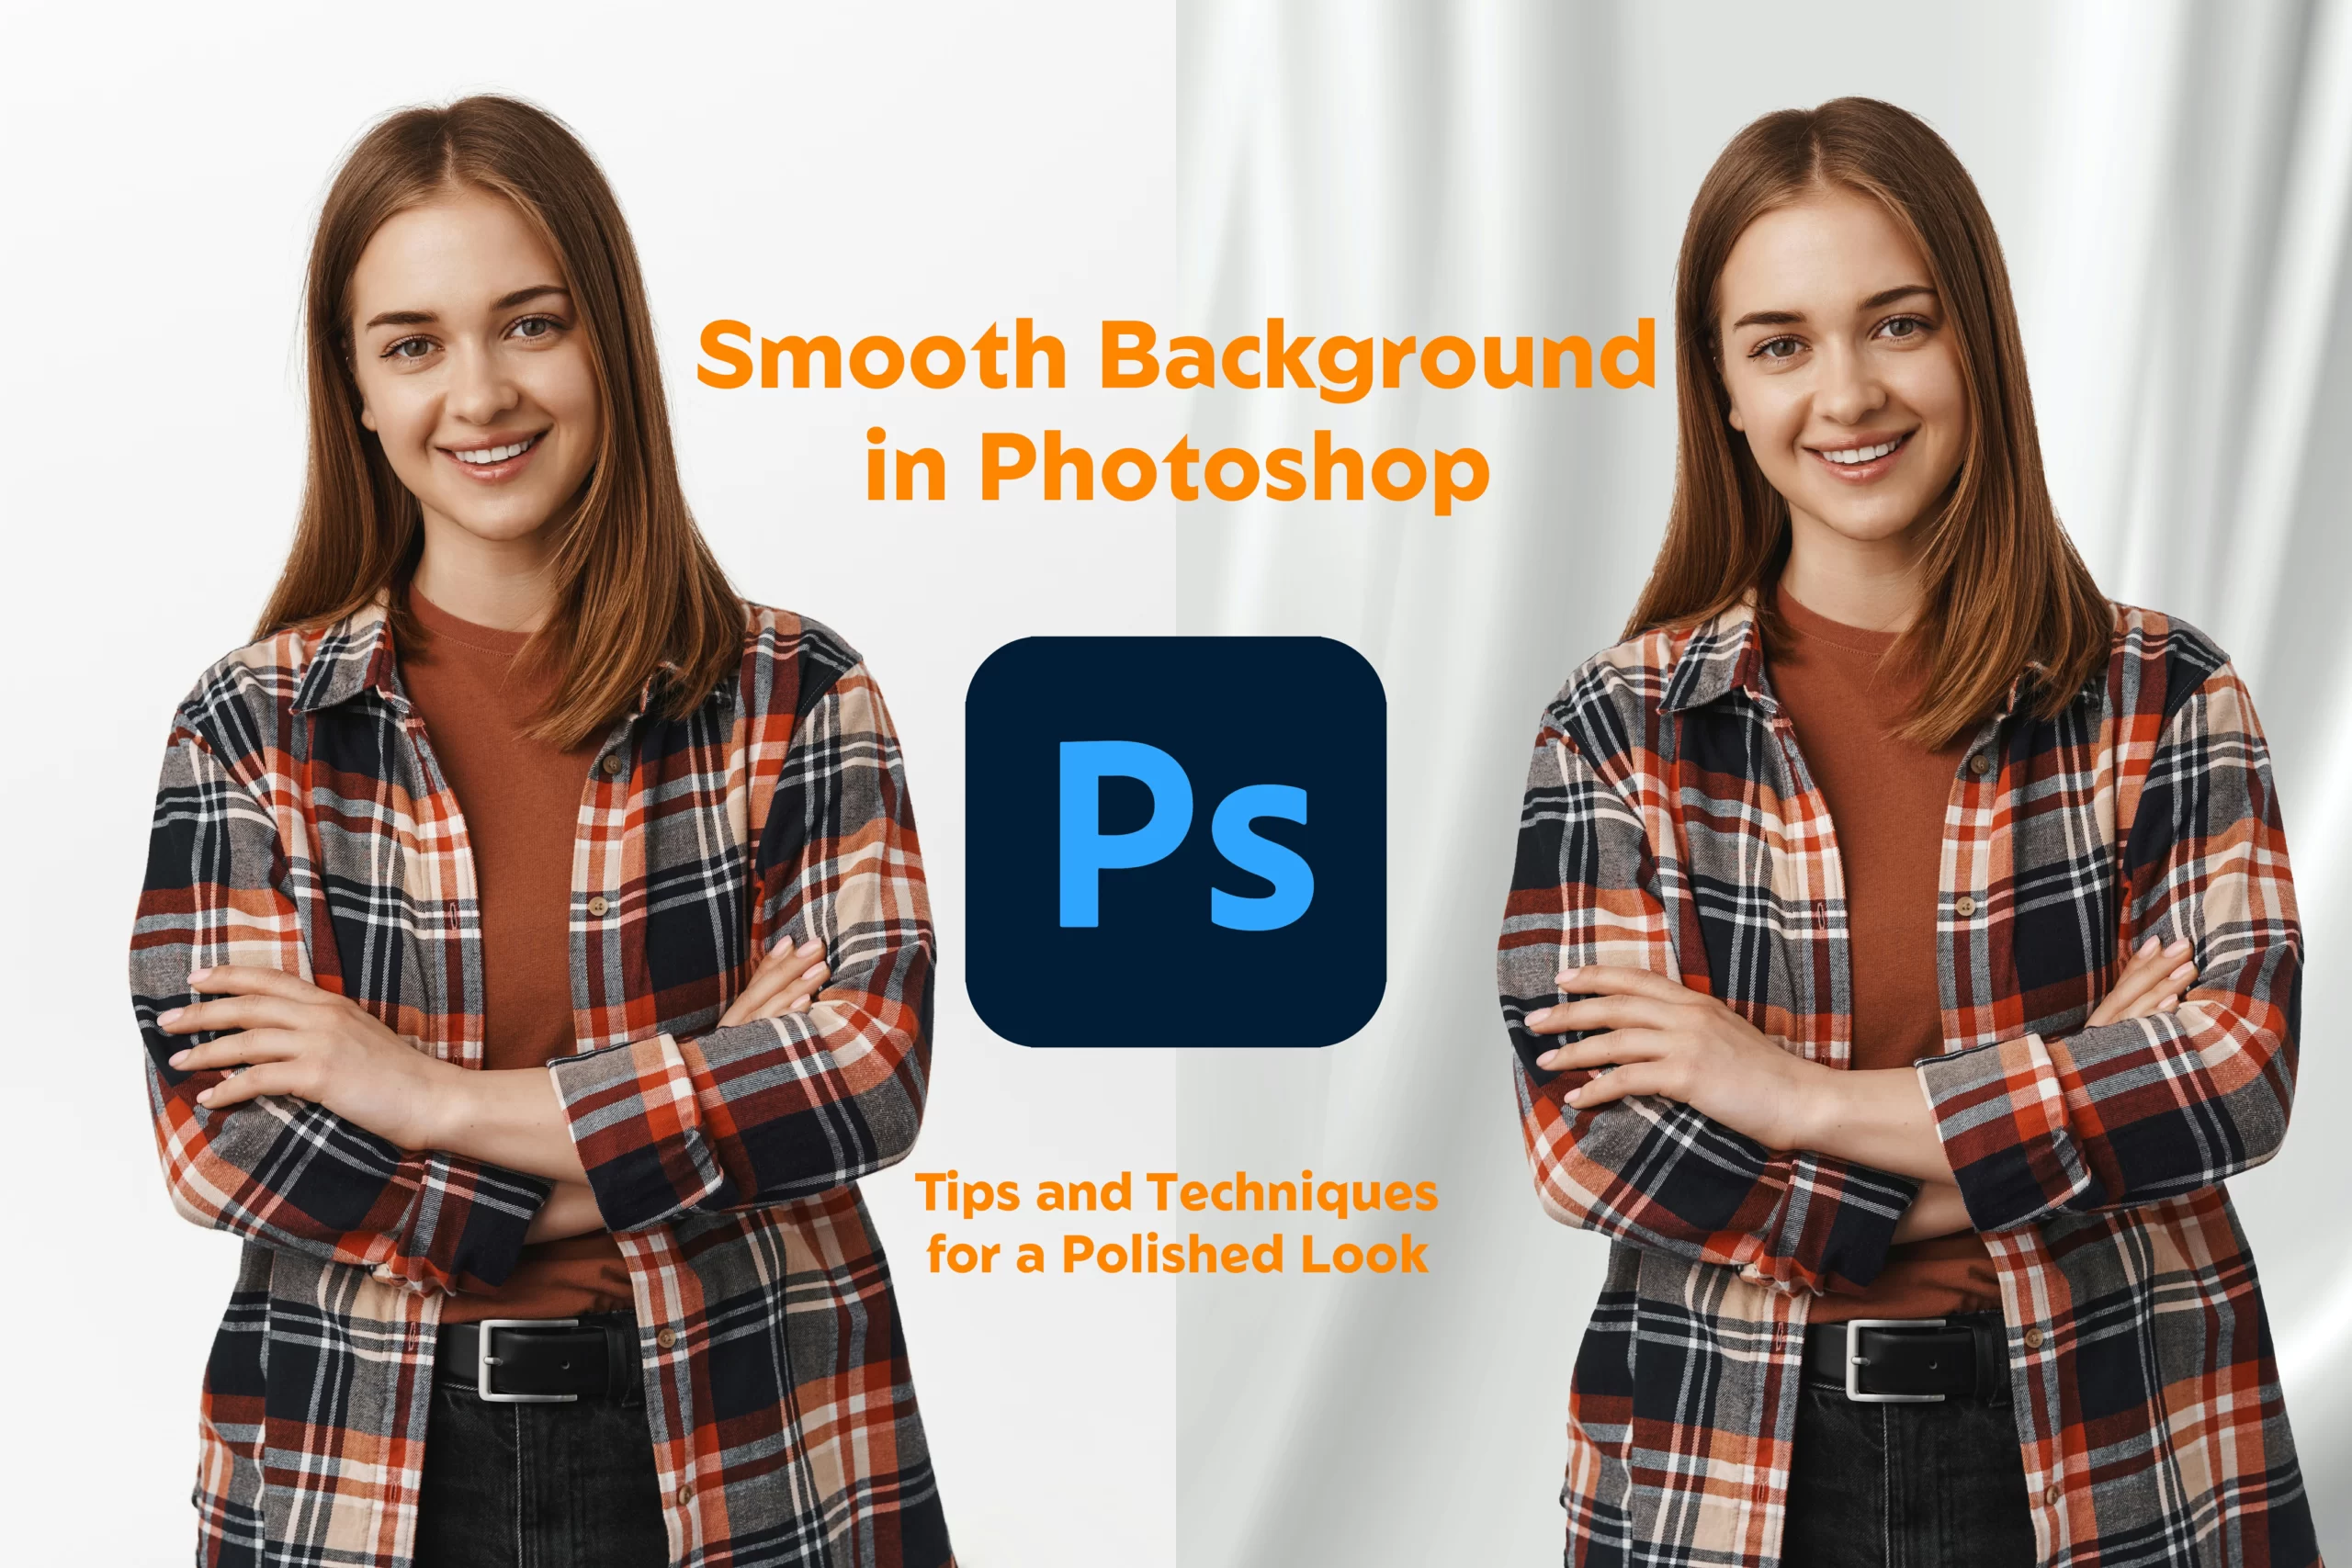 How-to-Smooth-Background-in-Photoshop-Tips-and-Techniques-for-a-Polished-Look